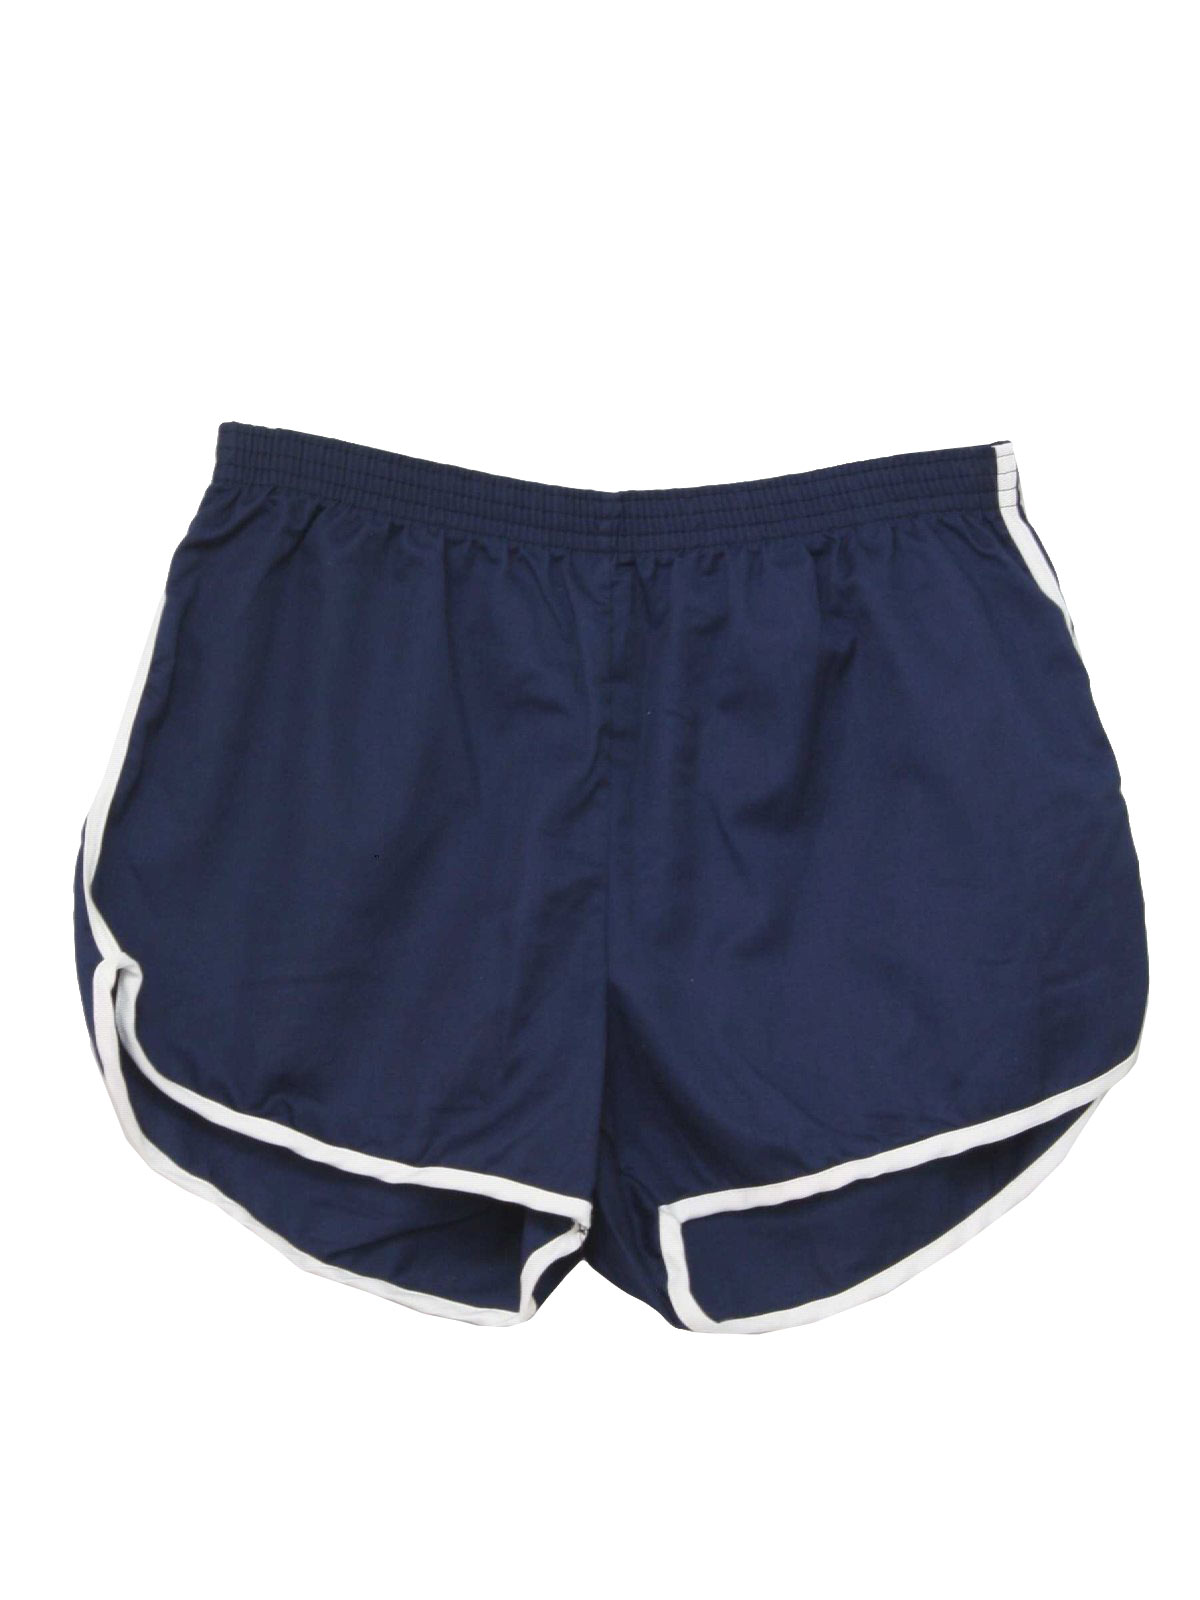 70's Missing Label Shorts: 70s -Missing Label- Mens blue and white ...